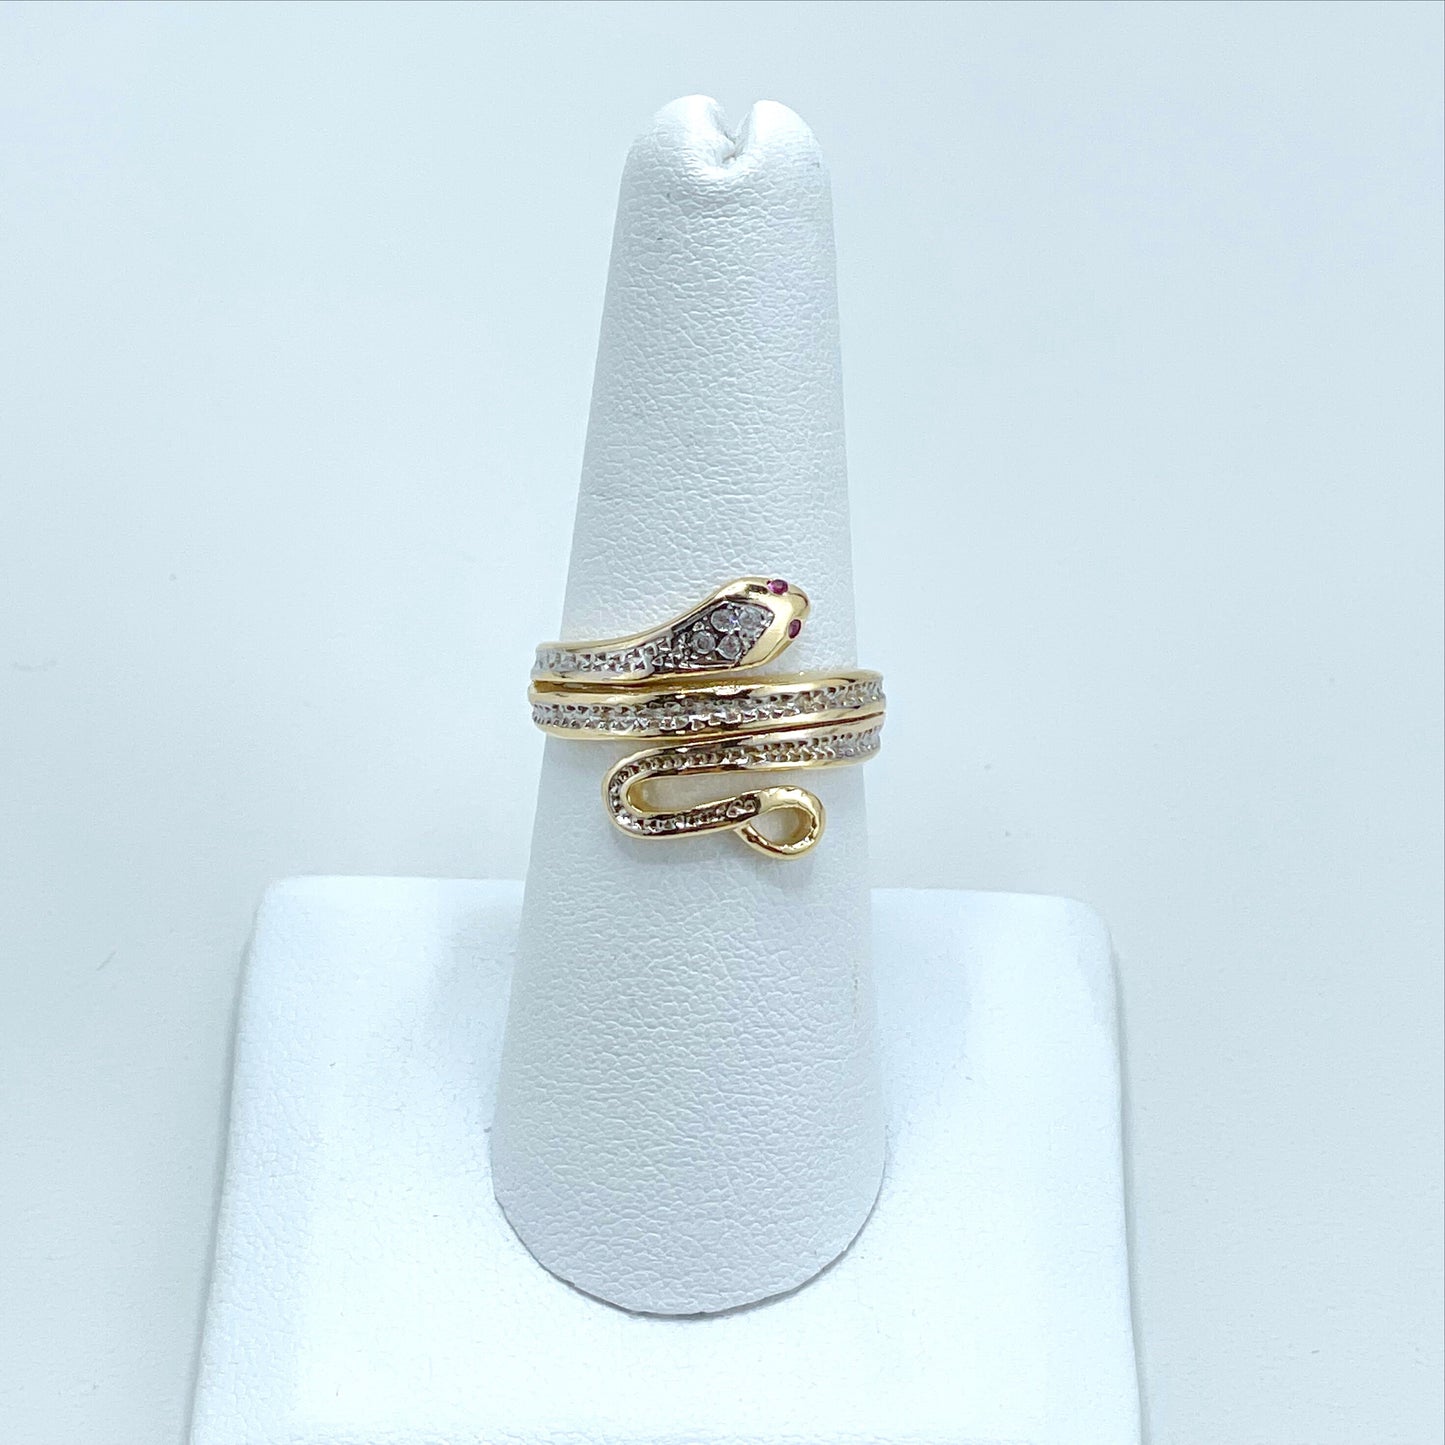 18k Gold Filled With Micro Cubic Zirconia and Silver Filled Sake Ring Wholesale Jewelry Supplies